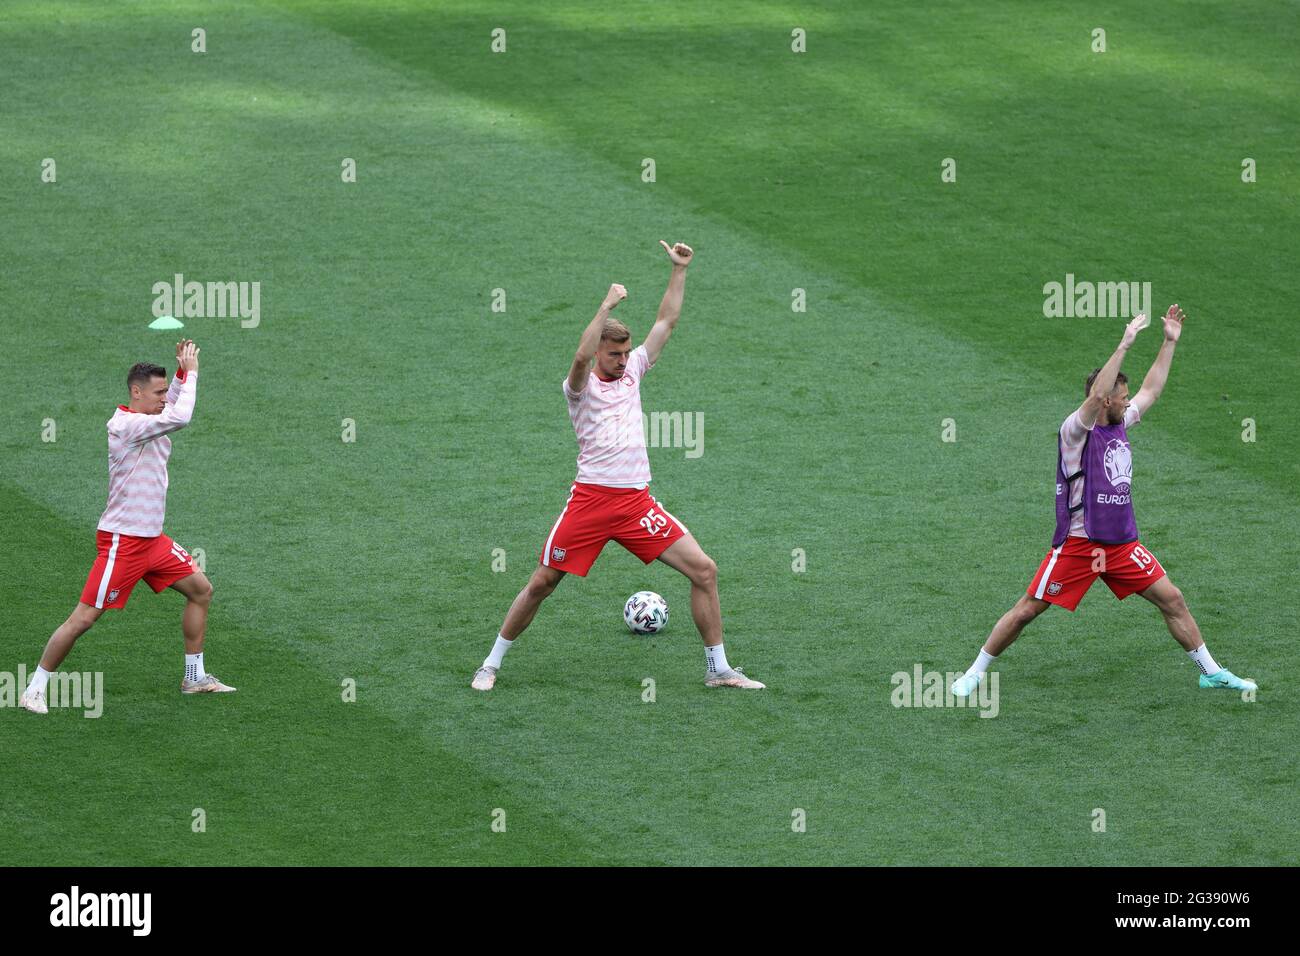 Saint Petersburg, Russia. 14th June, 2021. Maciej Rybus (13) of Slovakia warms up before the European championship EURO 2020 between Poland and Slovakia at Gazprom Arena.(Final Score; Poland 1:2 Slovakia). Credit: SOPA Images Limited/Alamy Live News Stock Photo